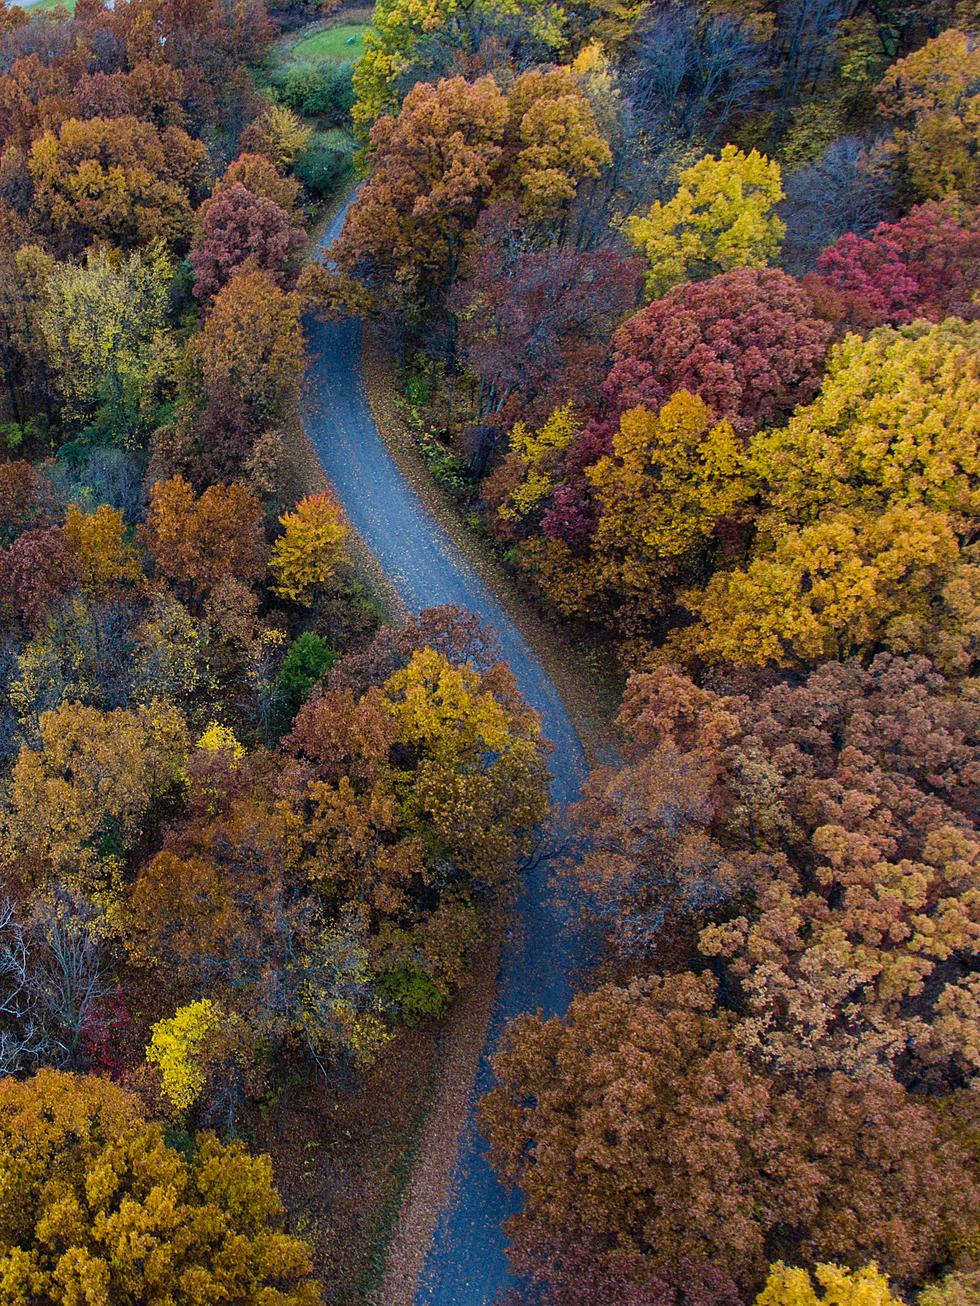 Check Out New Jersey's Amazing Fall Colors